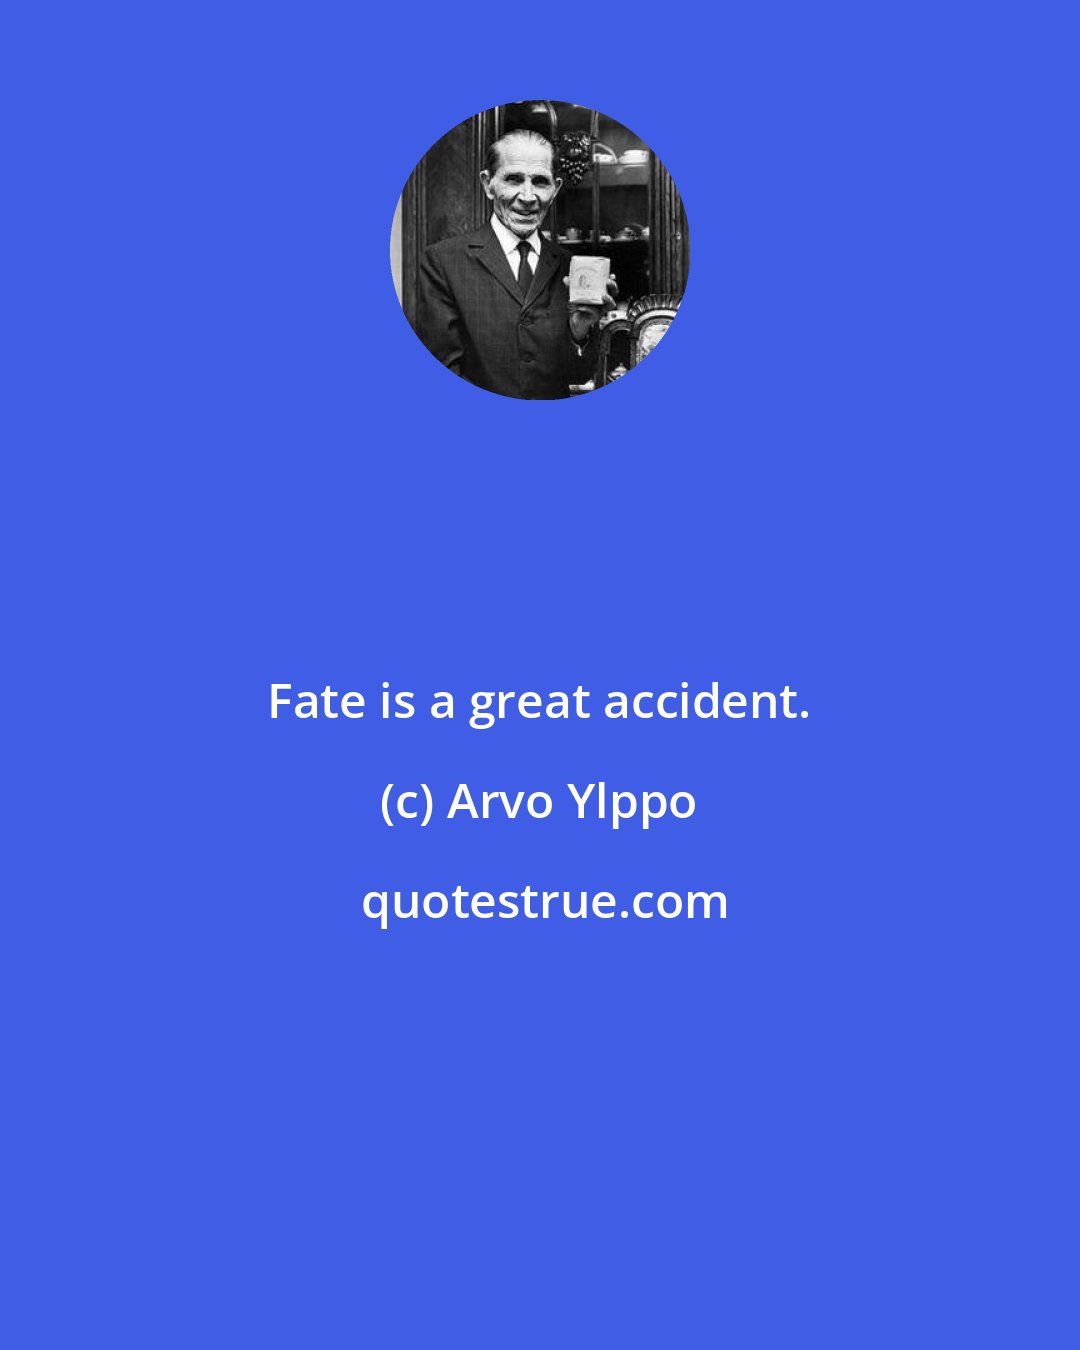 Arvo Ylppo: Fate is a great accident.